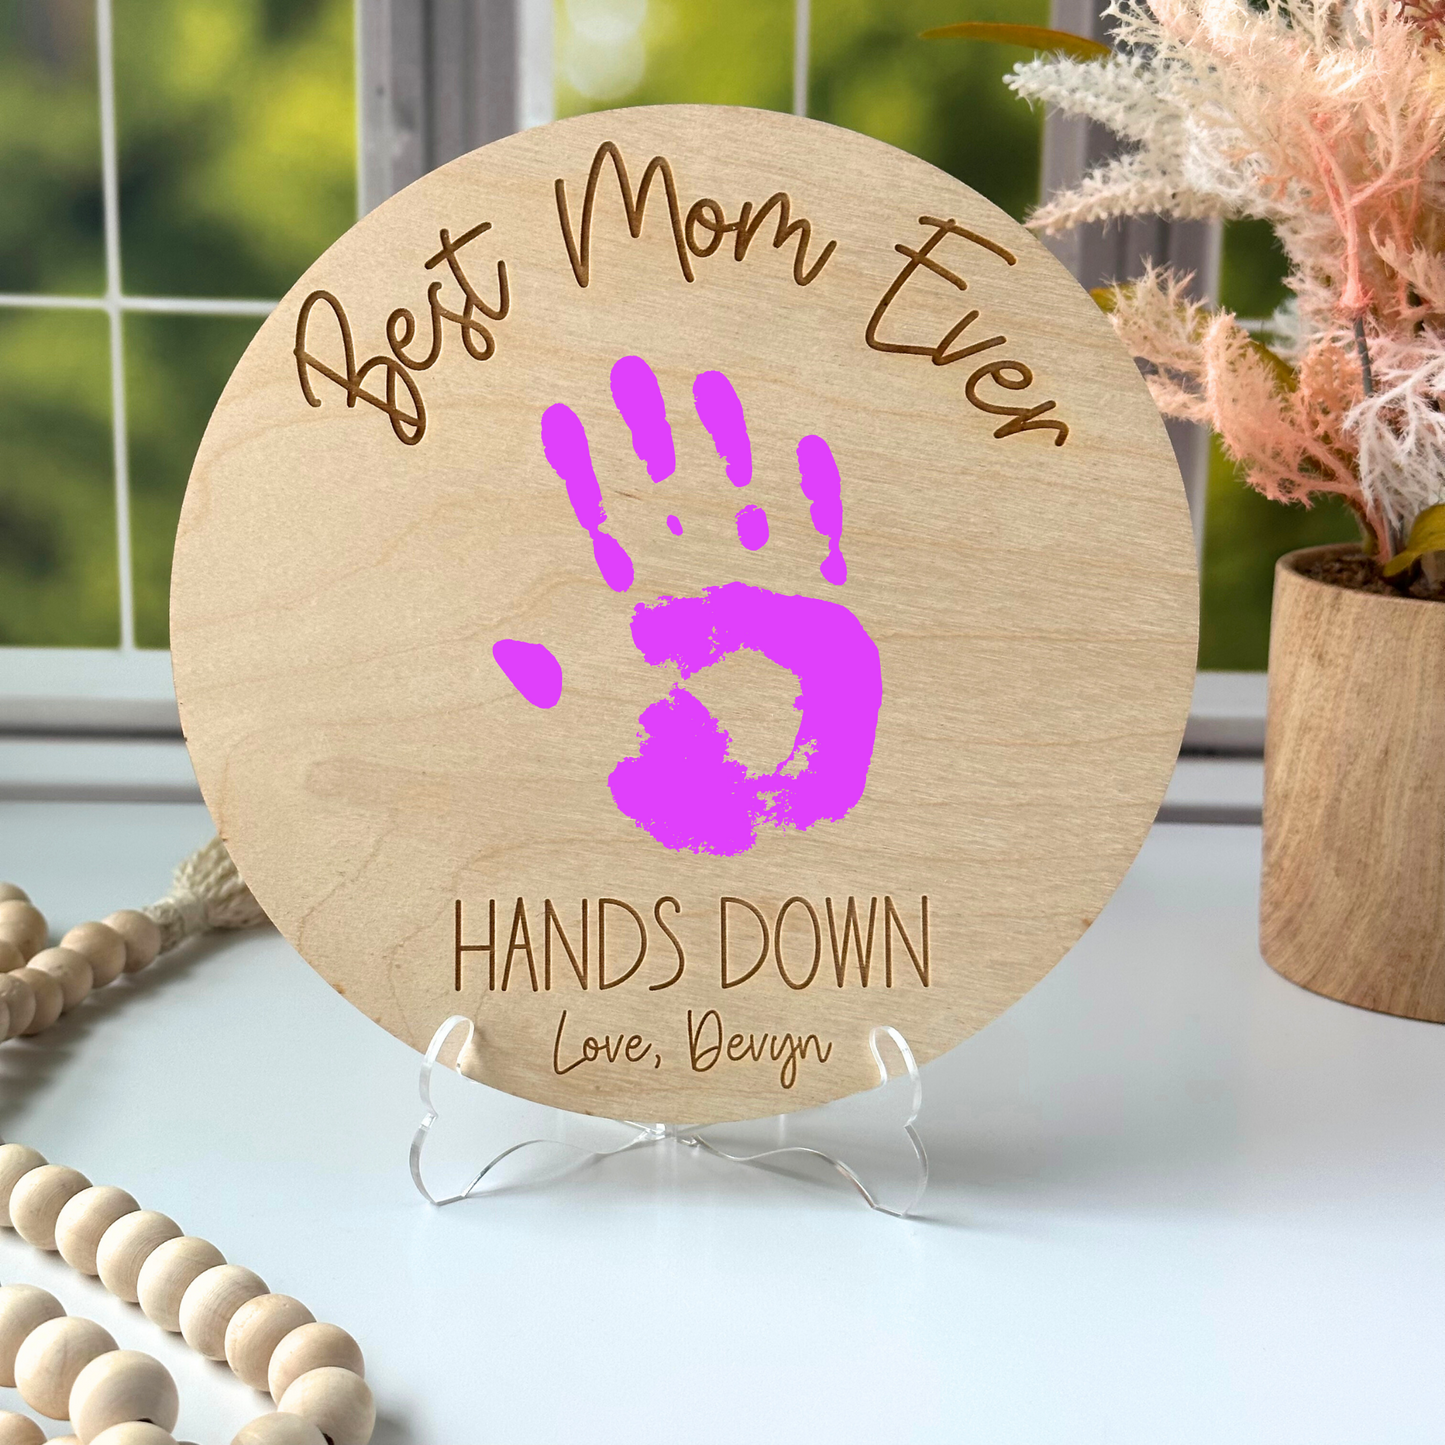 Best Mother's Day Craft - Hands Down! - OOLY